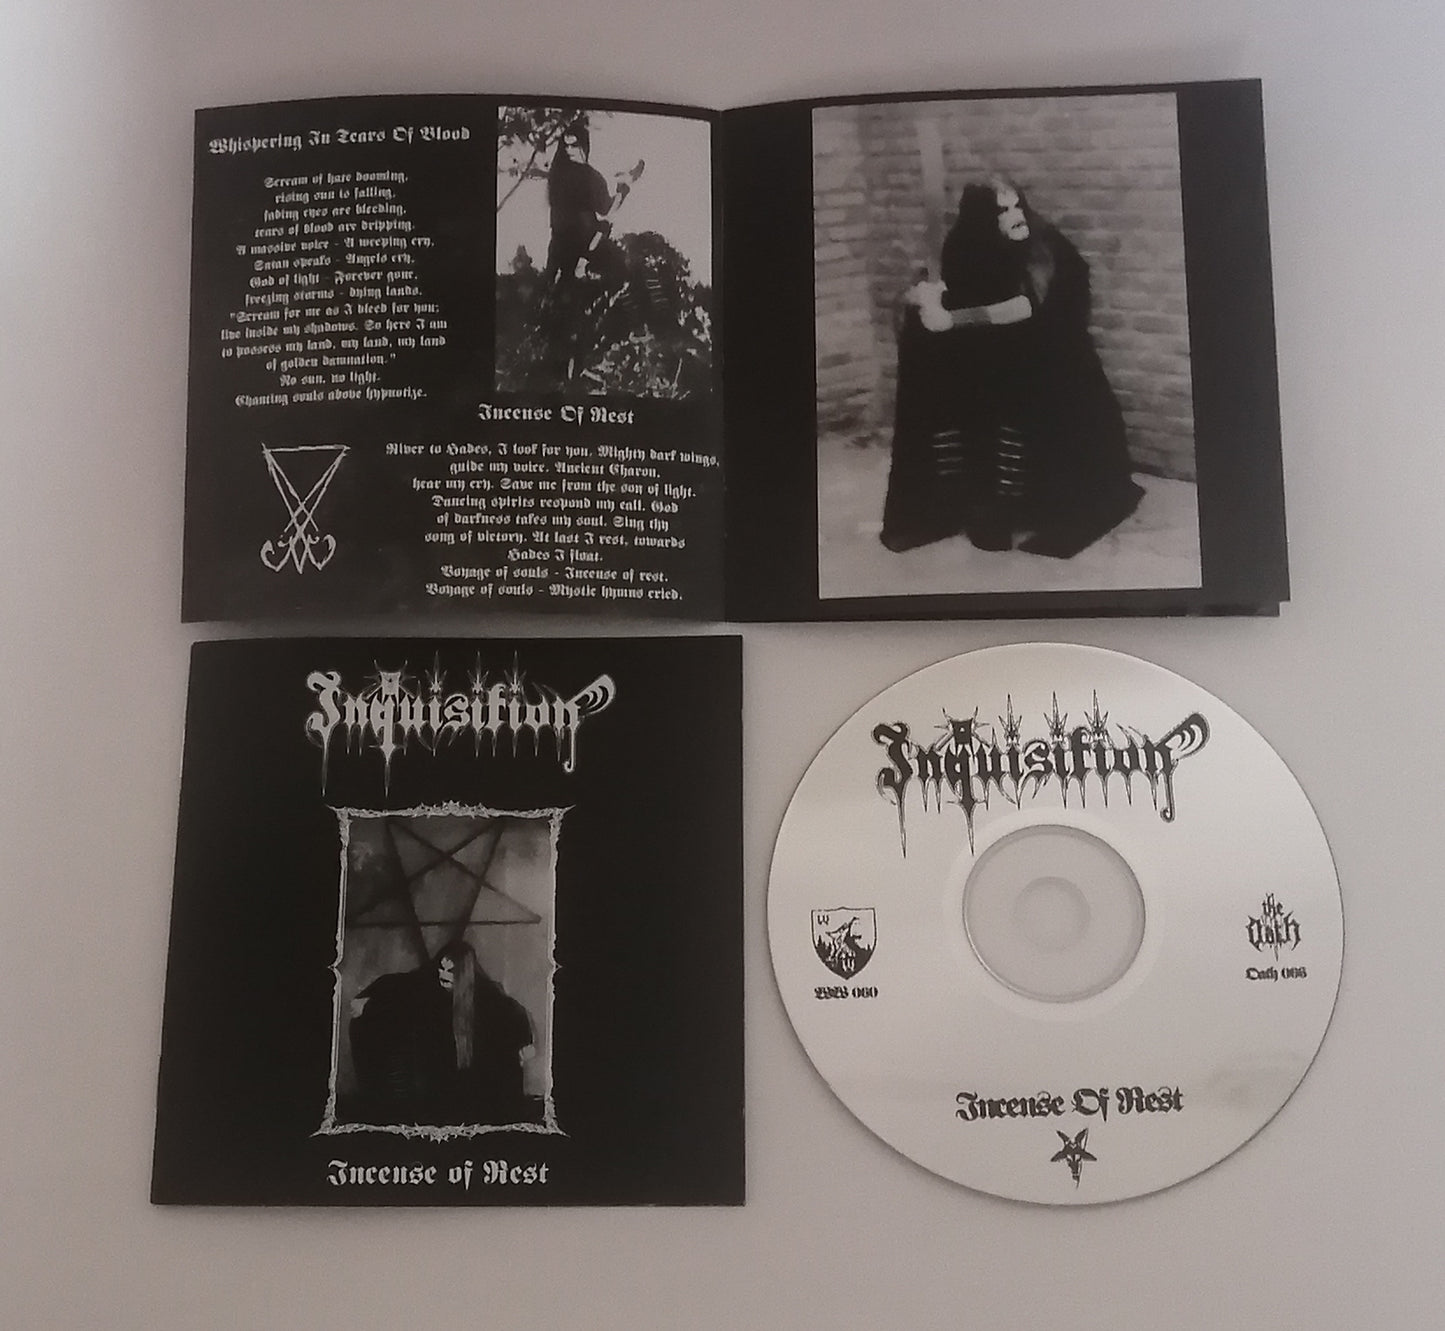 Inquisition (Col) "Incense of Rest" - CDs